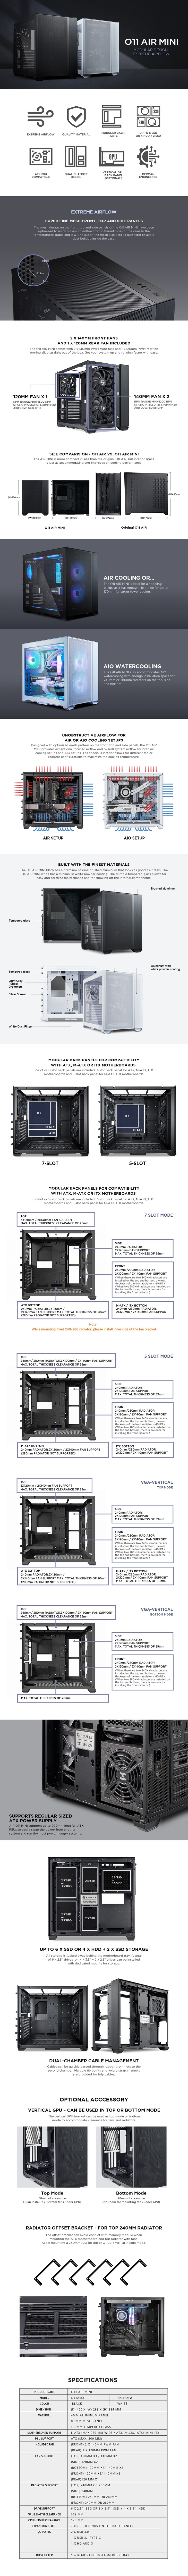 A large marketing image providing additional information about the product Lian Li O11 Air Mini Mid Tower Case - Black - Additional alt info not provided